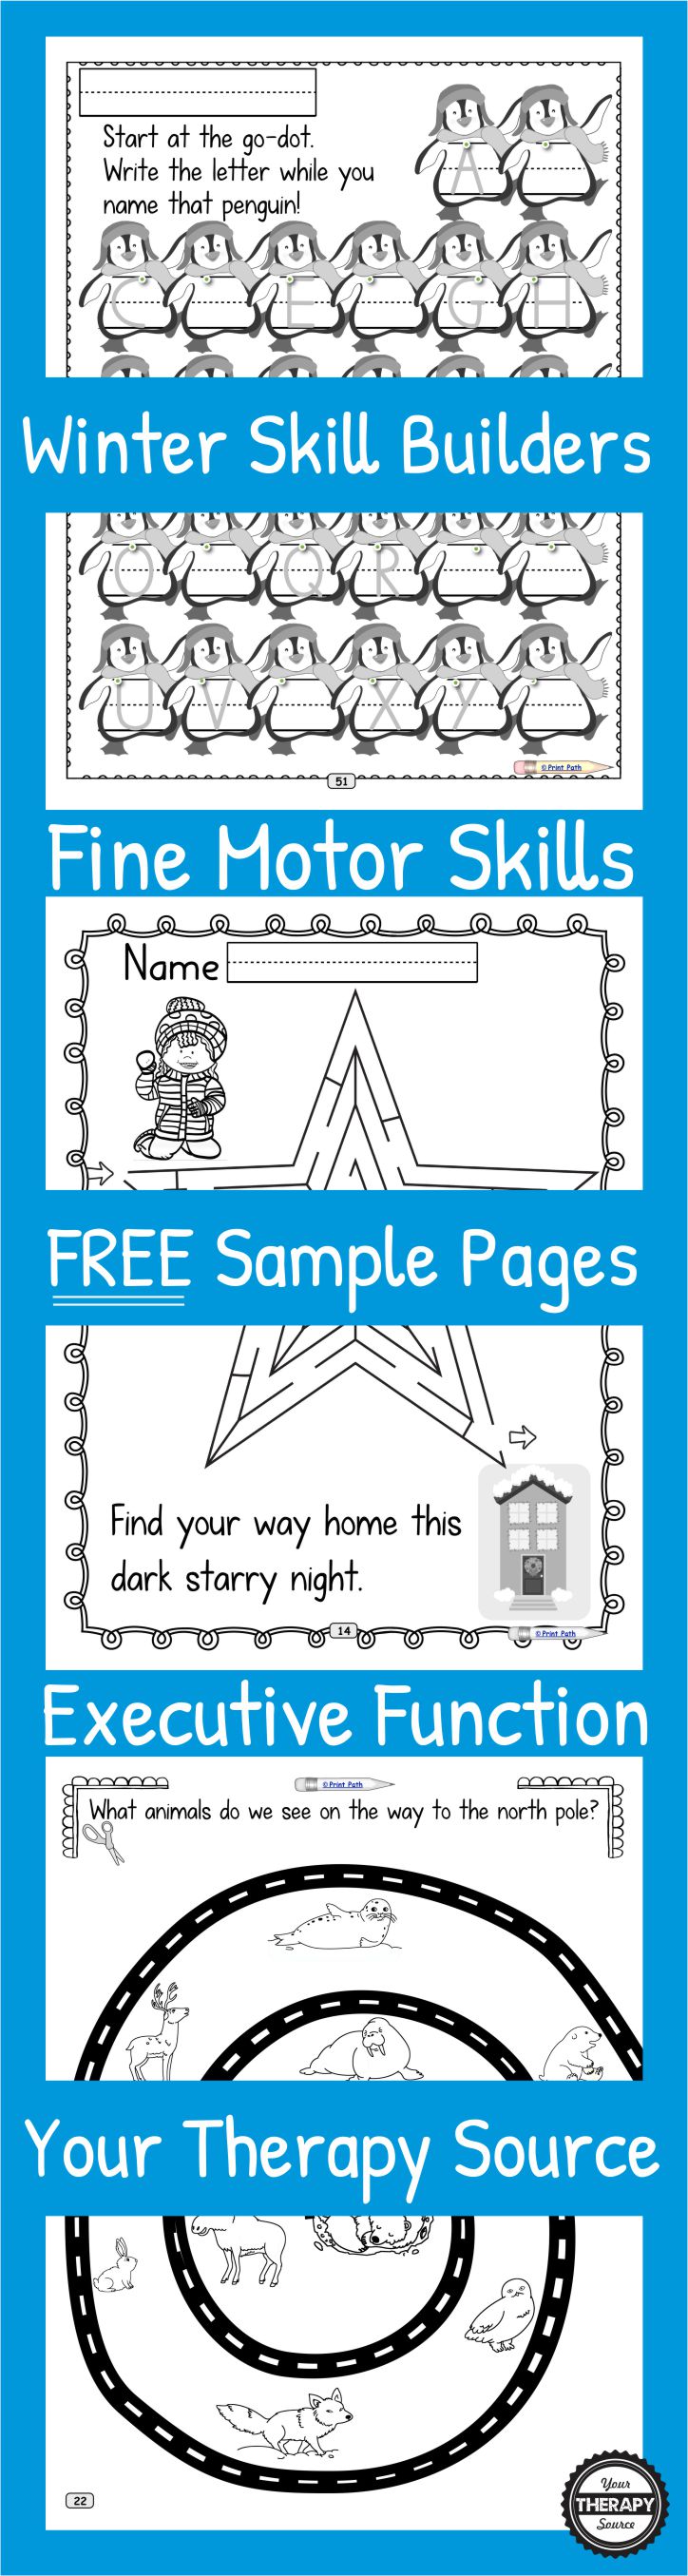 Fine Motor and Executive Function Skills with a Winter Theme from the Winter Skill Builders Packet Three Free Sample Pages